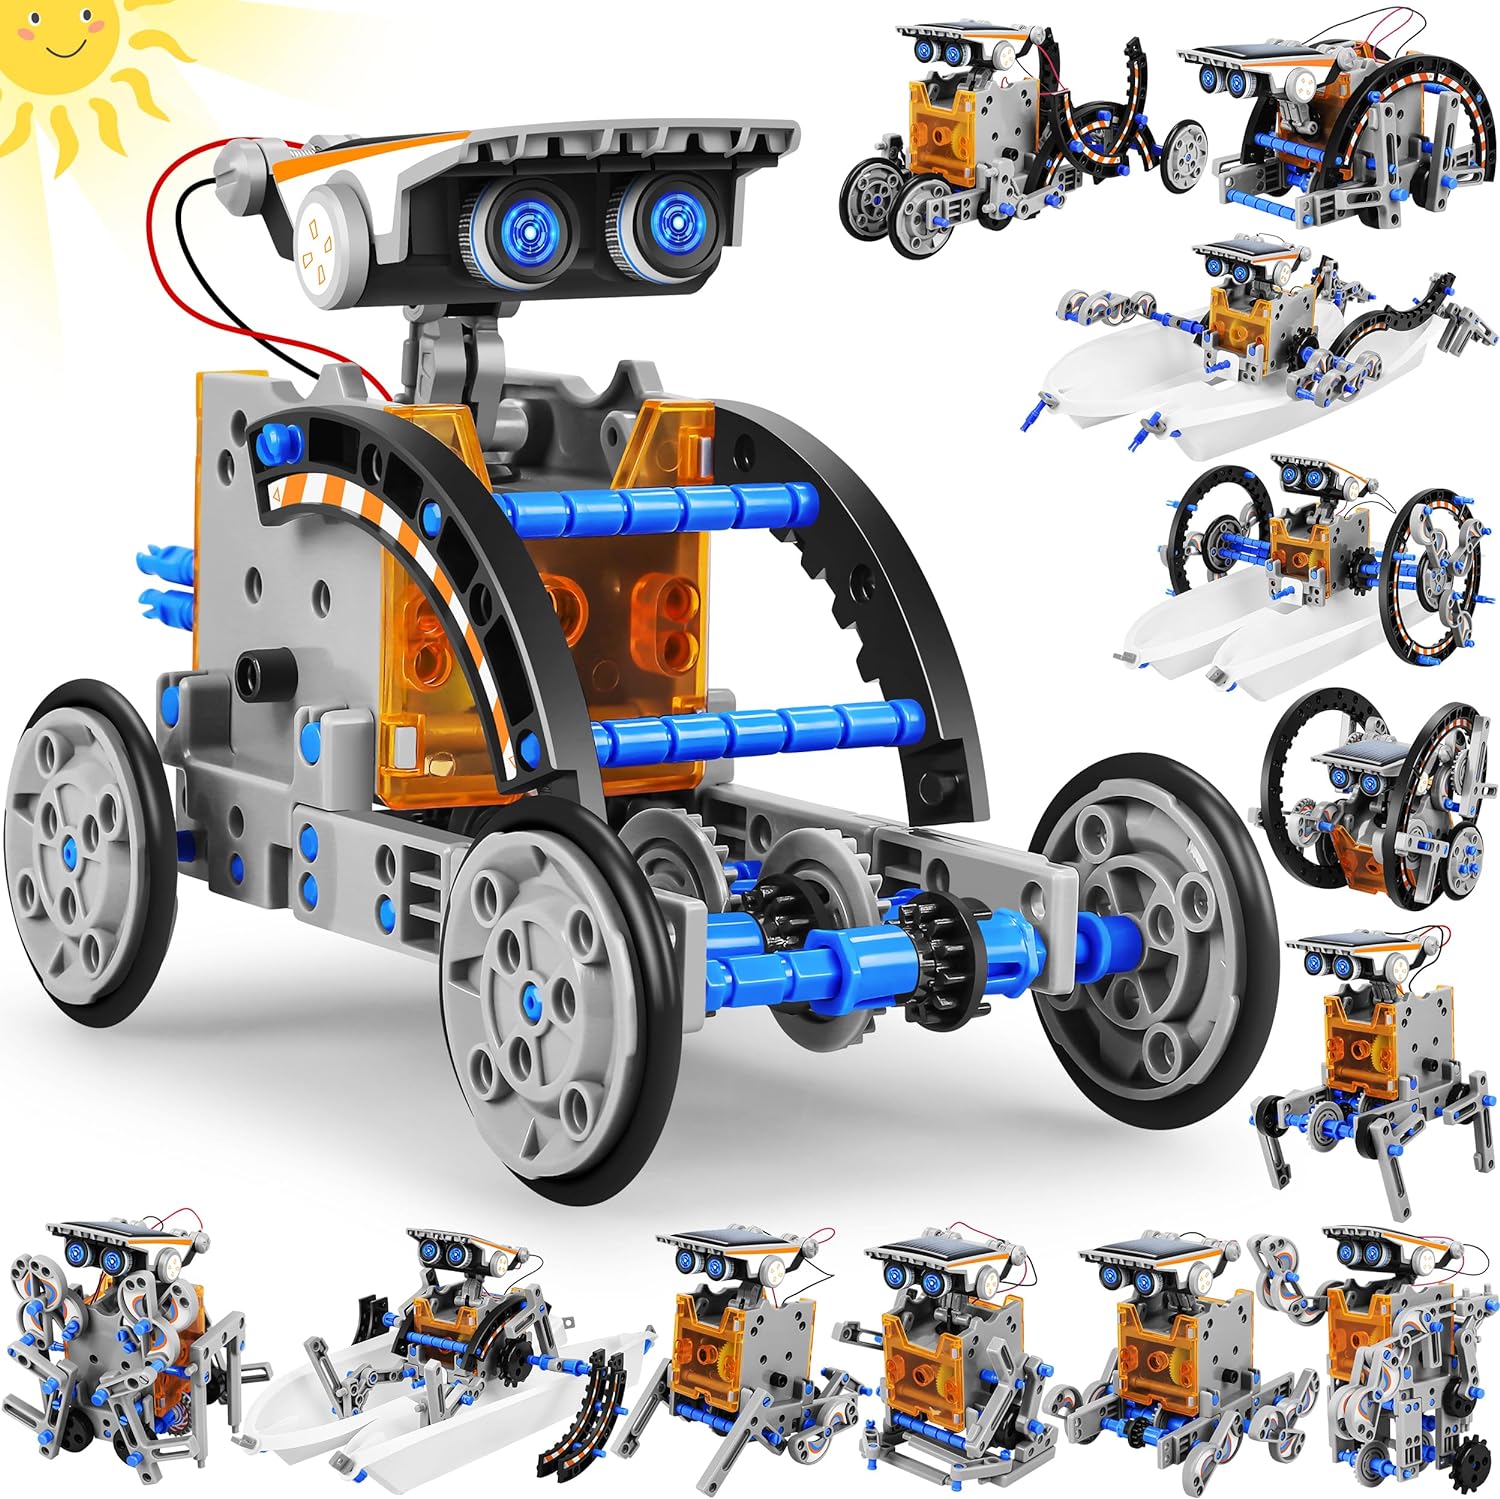 STEM 13-in-1 Education Solar Power Robots Toys for Boys Age 8-12, Educational Toy DIY Science Kits for Kids, Building Experiment Robotics Set Birthday Gifts for 8 9 10 11 12 Years Old Boys Girls Teens : Toys Games